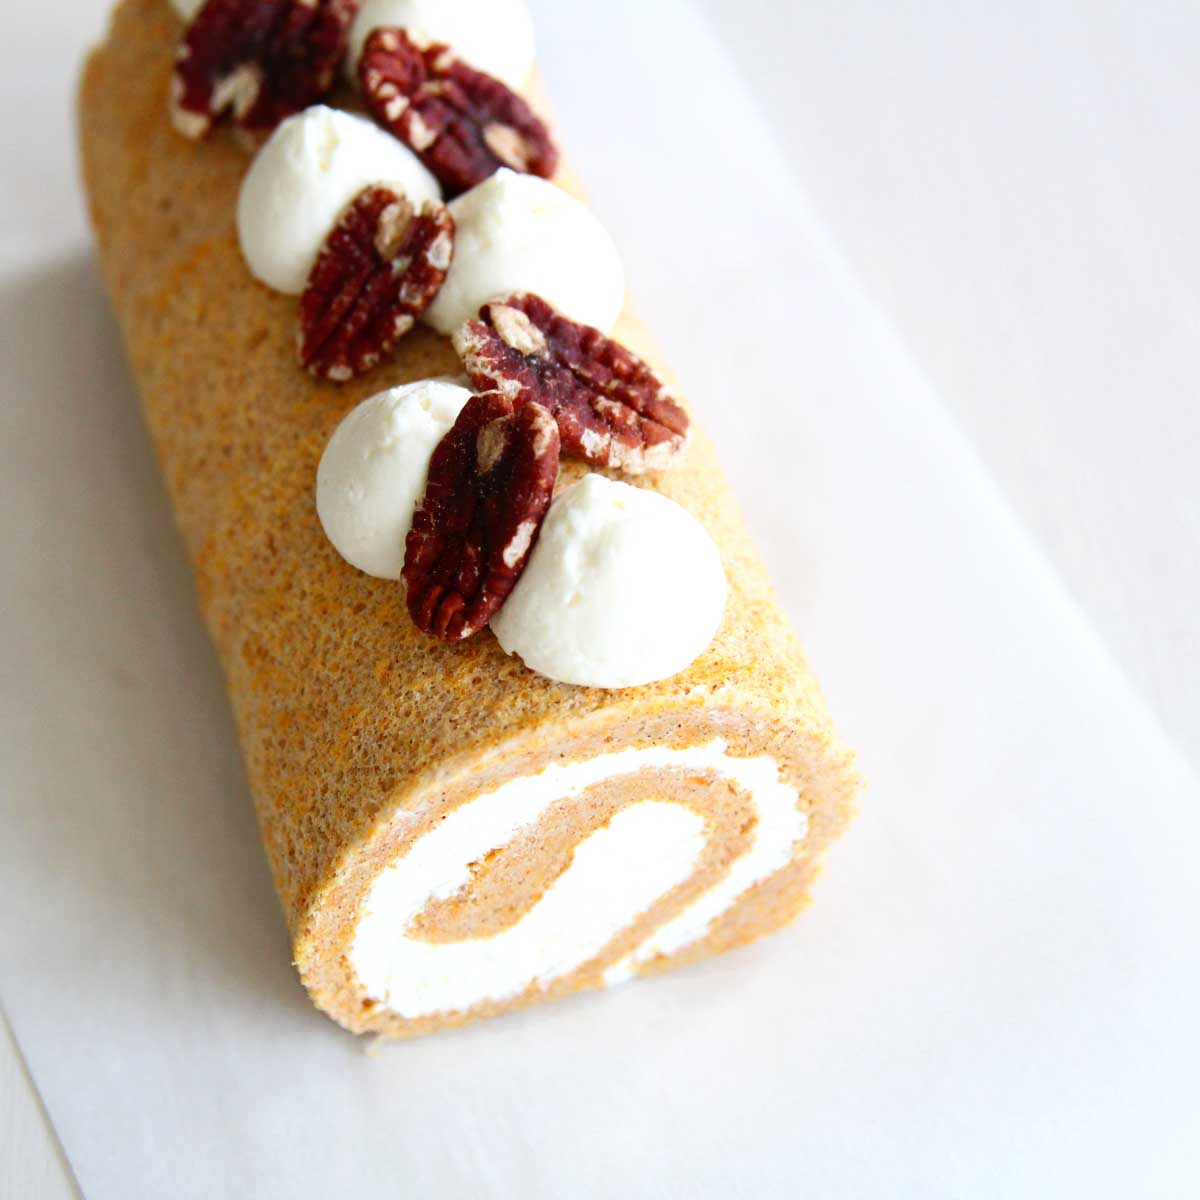 Flourless Sweet Potato Swiss Roll Cake (Lower Carb, Lower Calorie Recipe) - Brown Sugar Whipped Cream